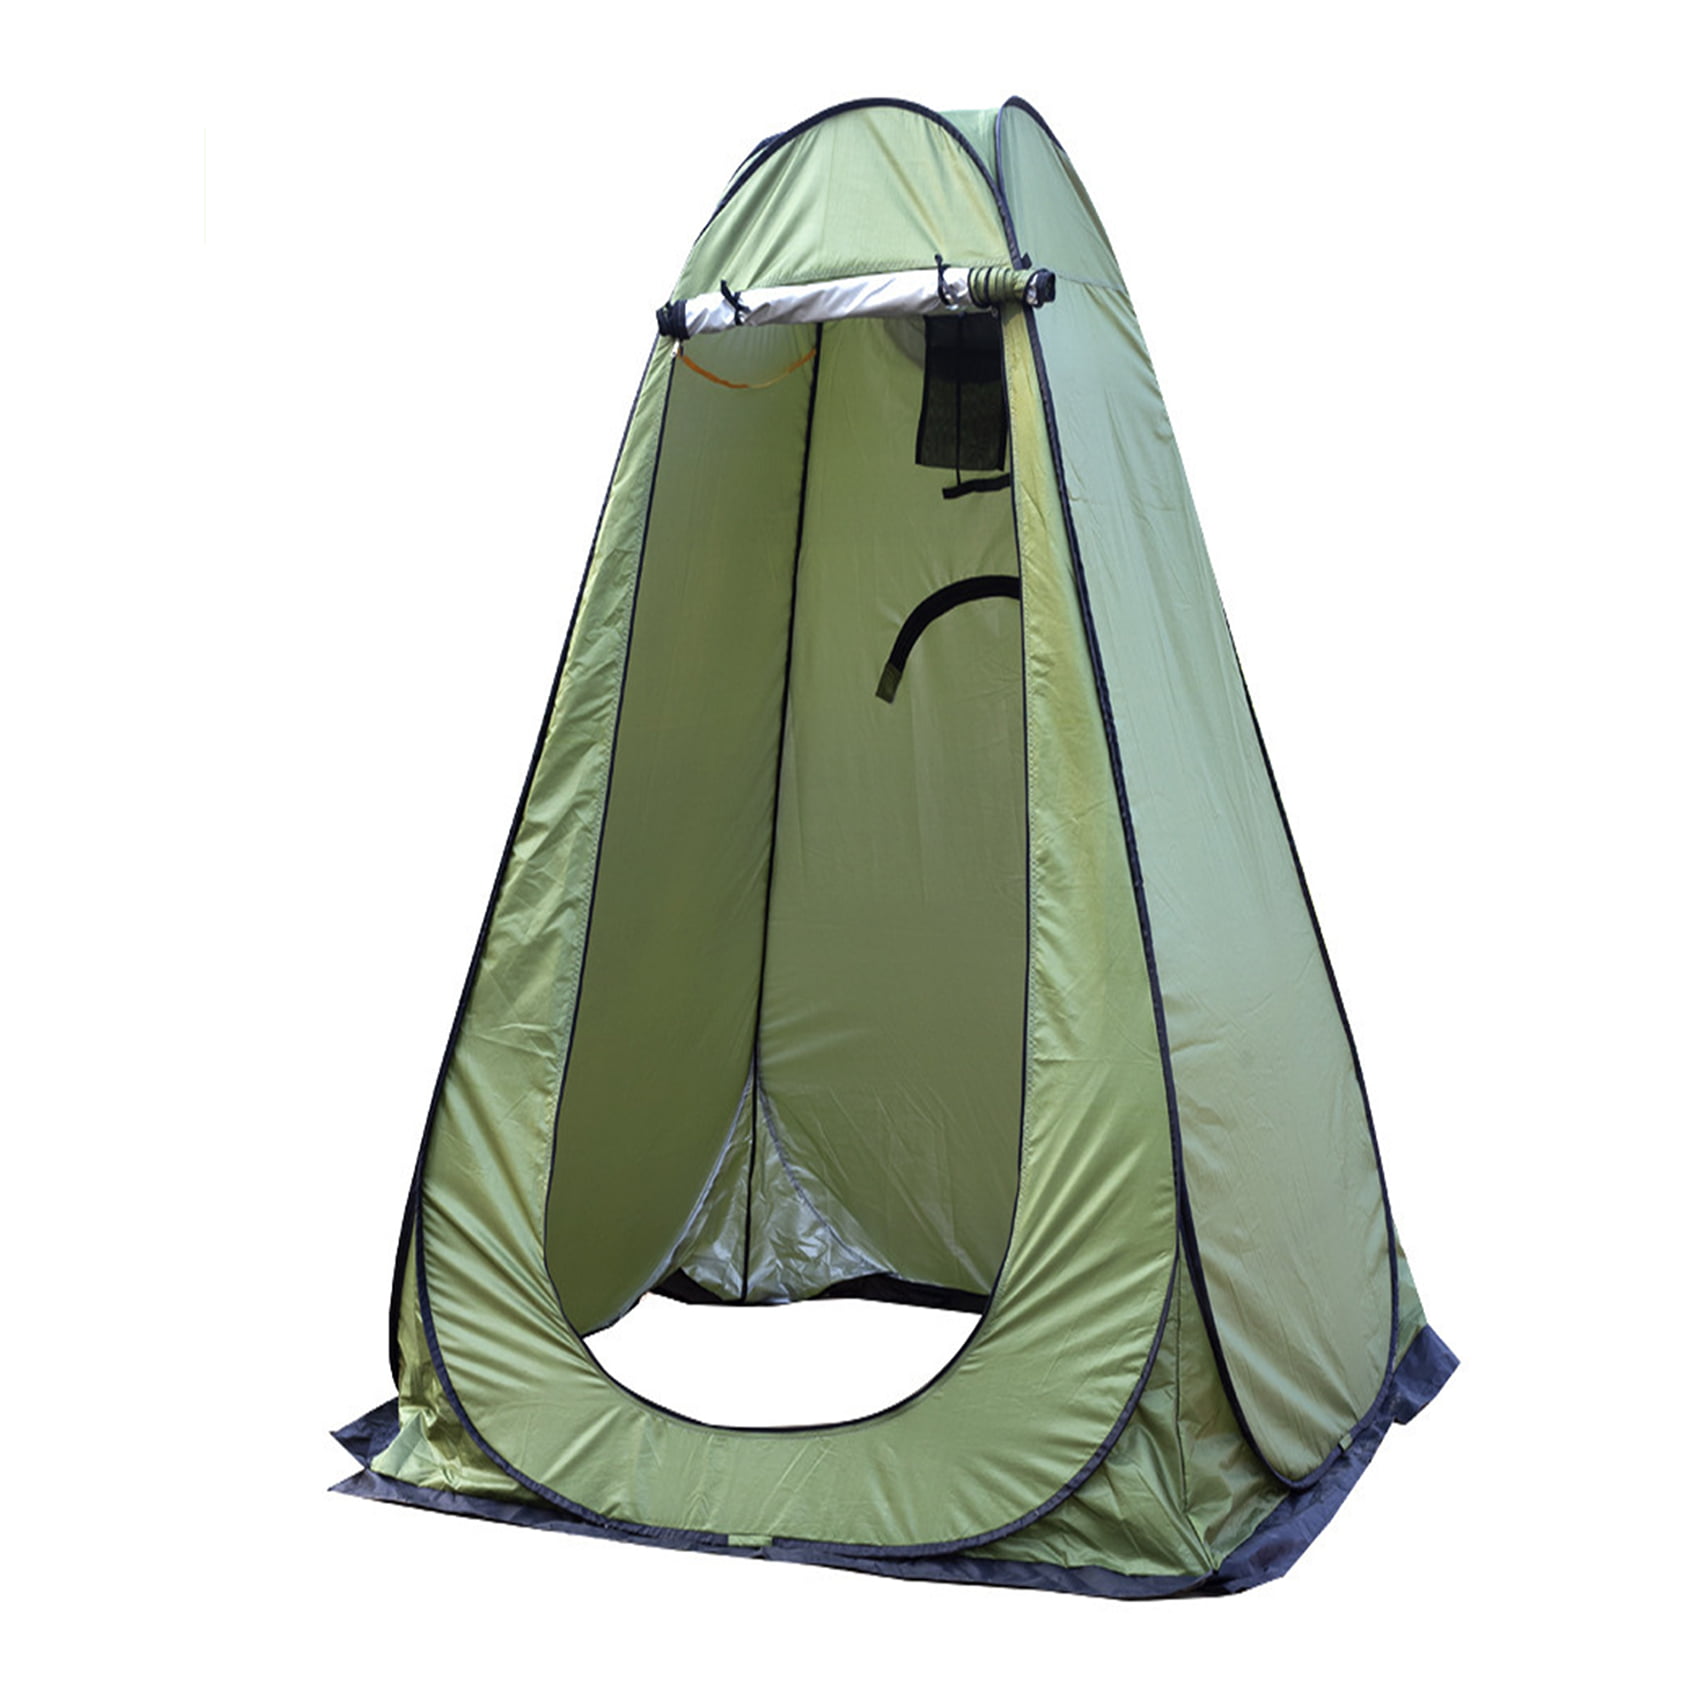 Camping Toilet Tent Pop Up Shower Privacy Tent for Outdoor Changing Dressing Fishing Bathing Storage Room Tents A Height 1.9M Portable Outdoor Tent with Carrying Bag 